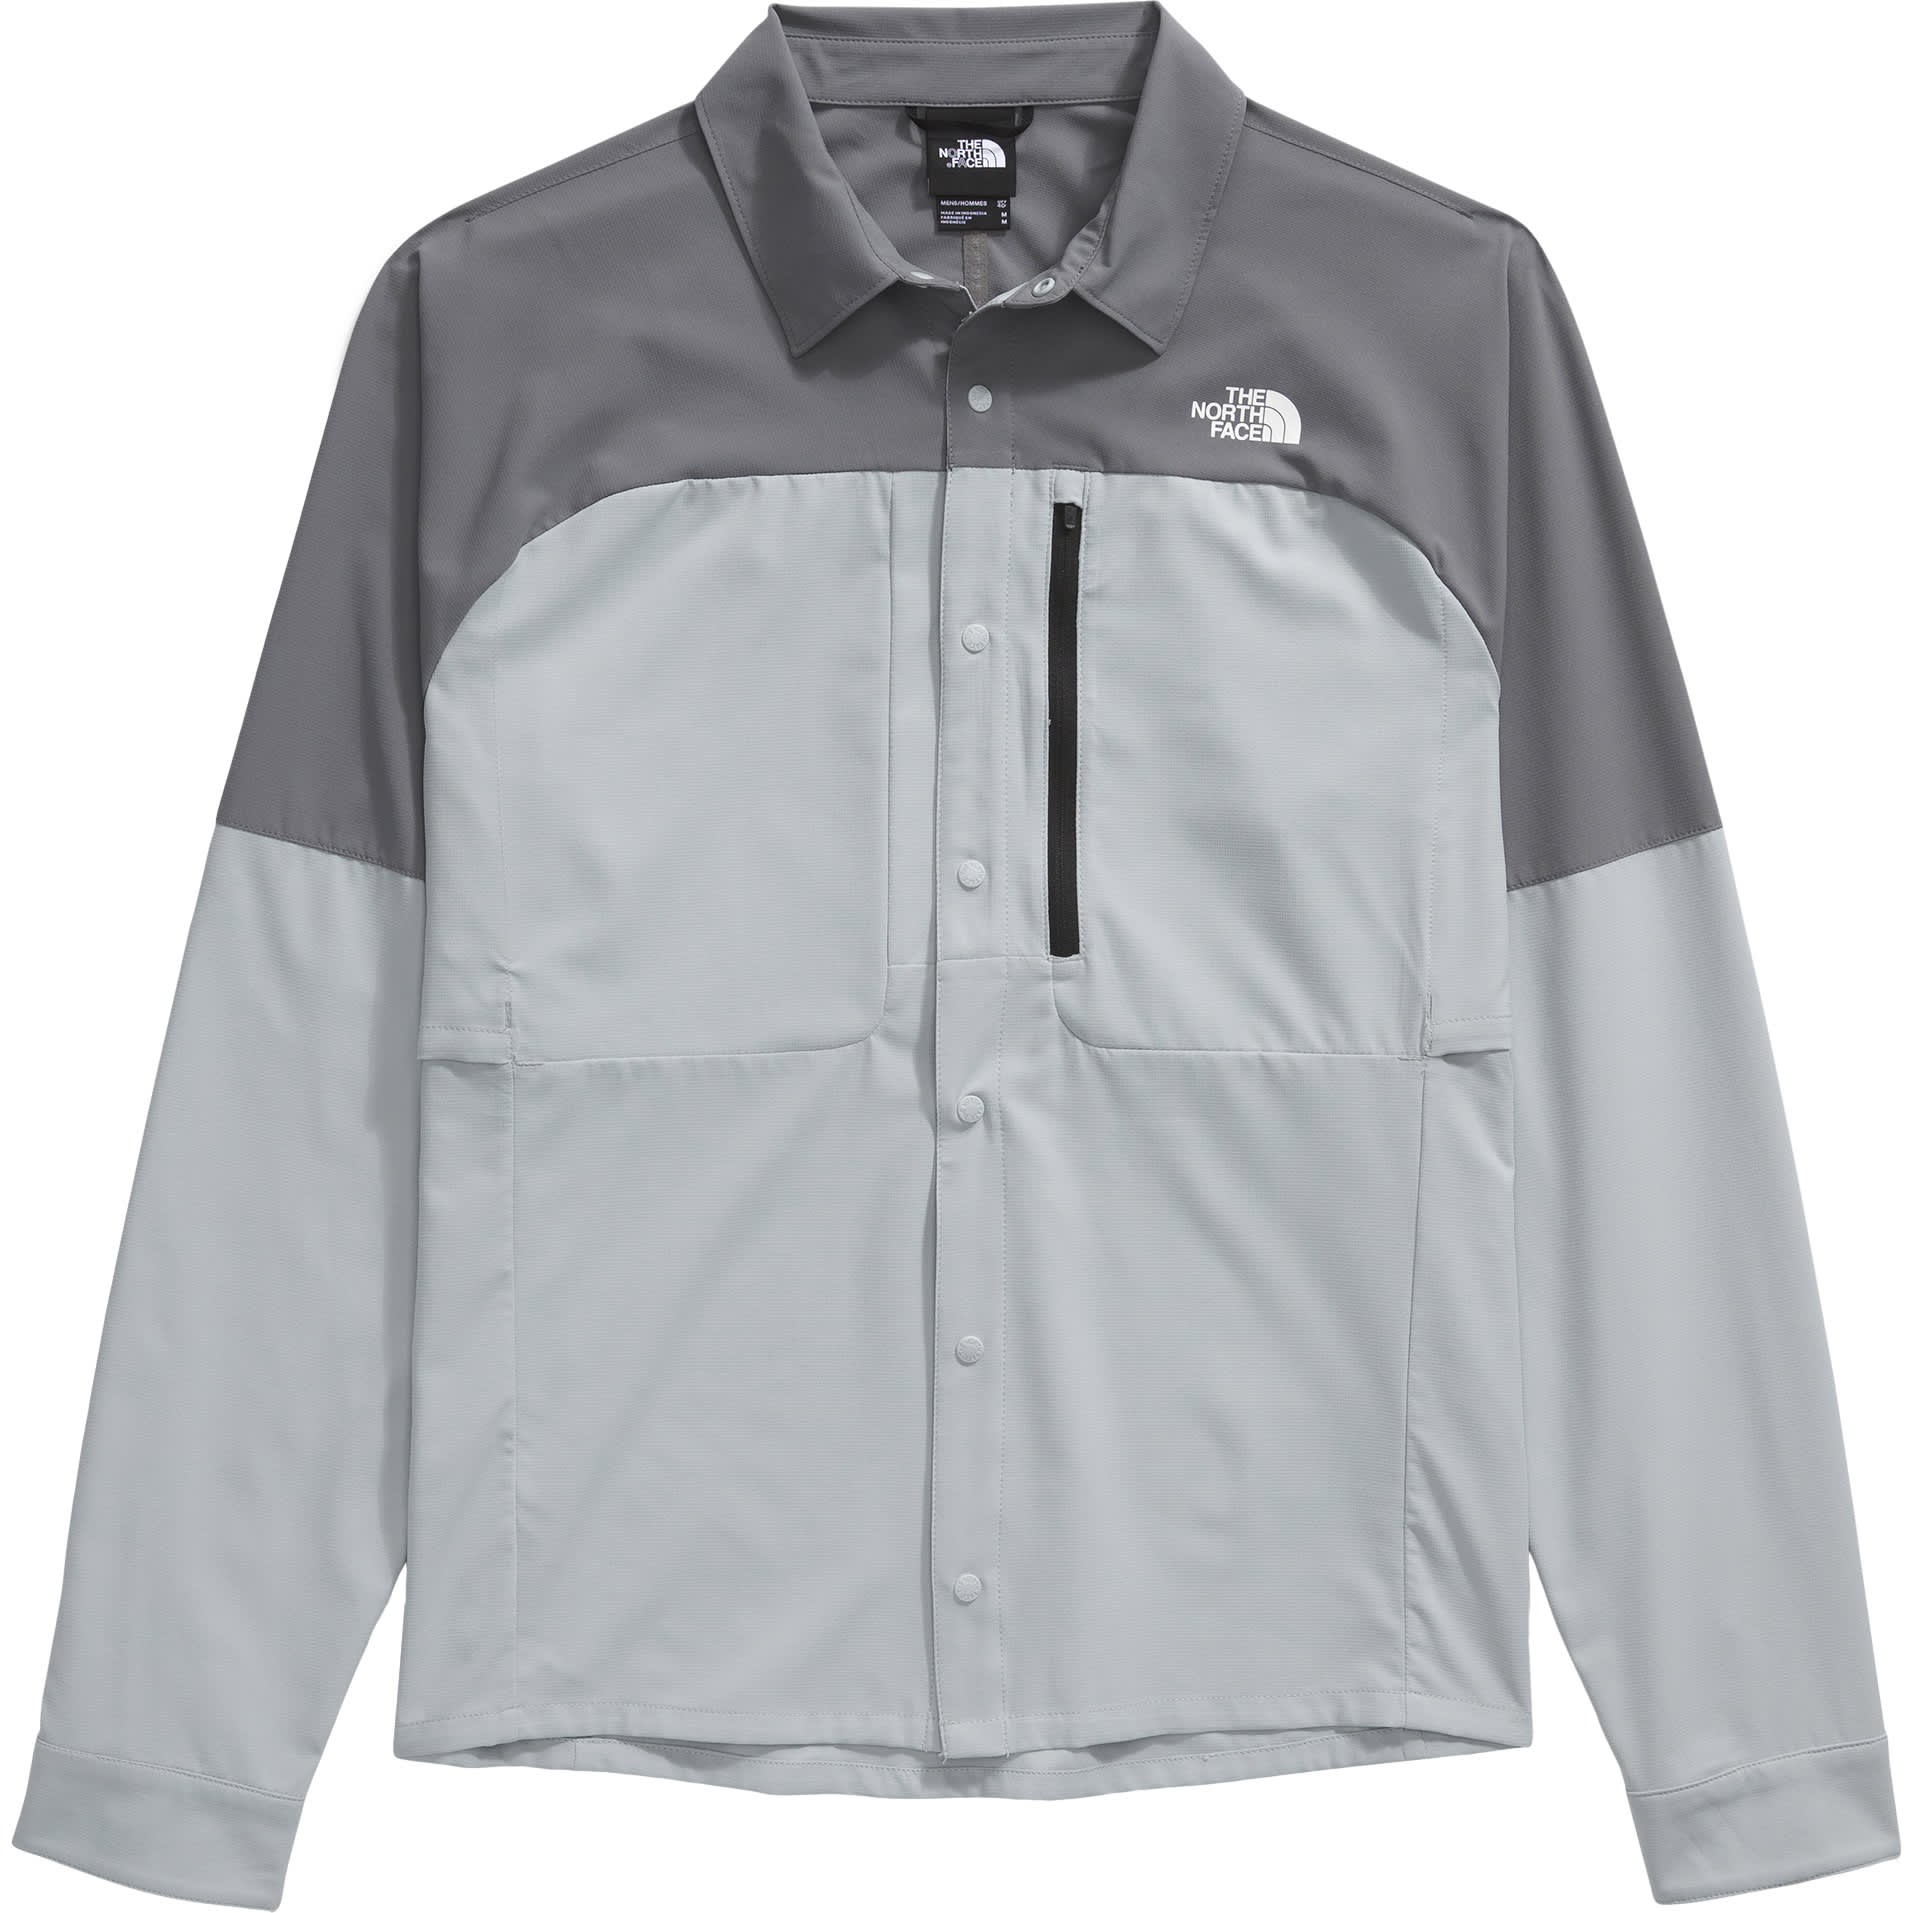 The North Face® Men’s First Trail Long-Sleeve Shirt